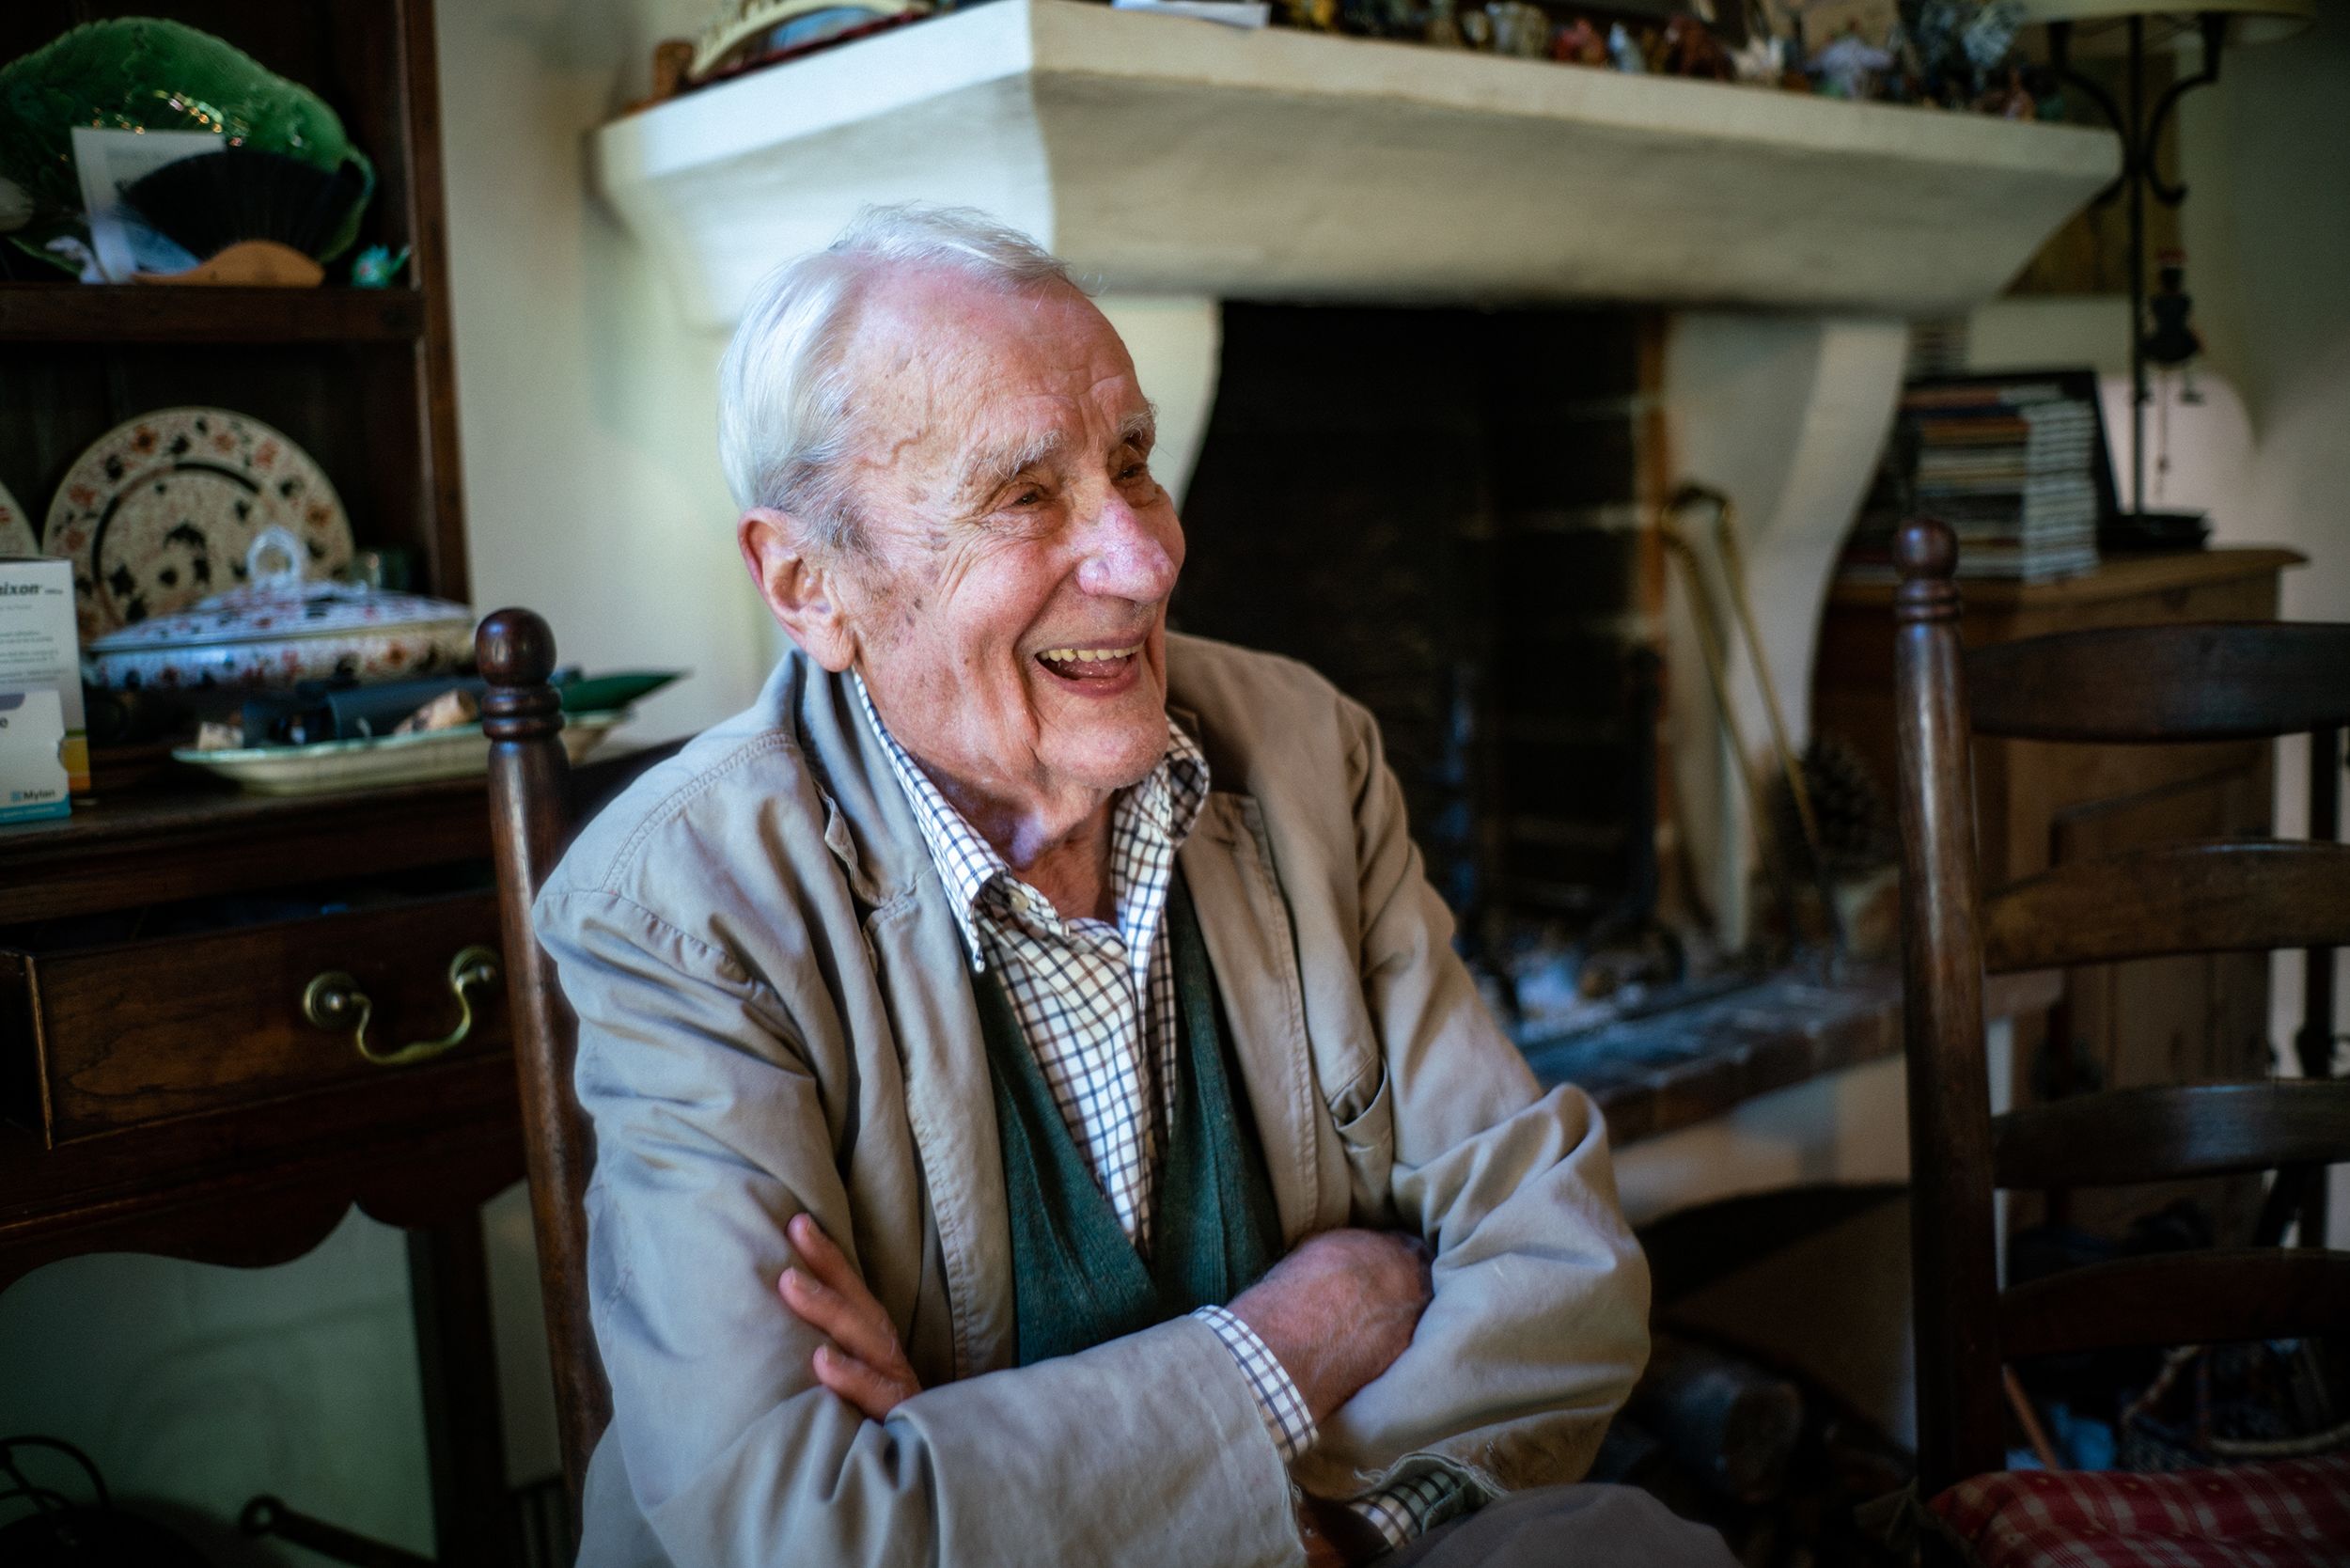 Christopher Tolkien, son of 'Lord of the Rings' author J.R.R. Tolkien, has  died at 95